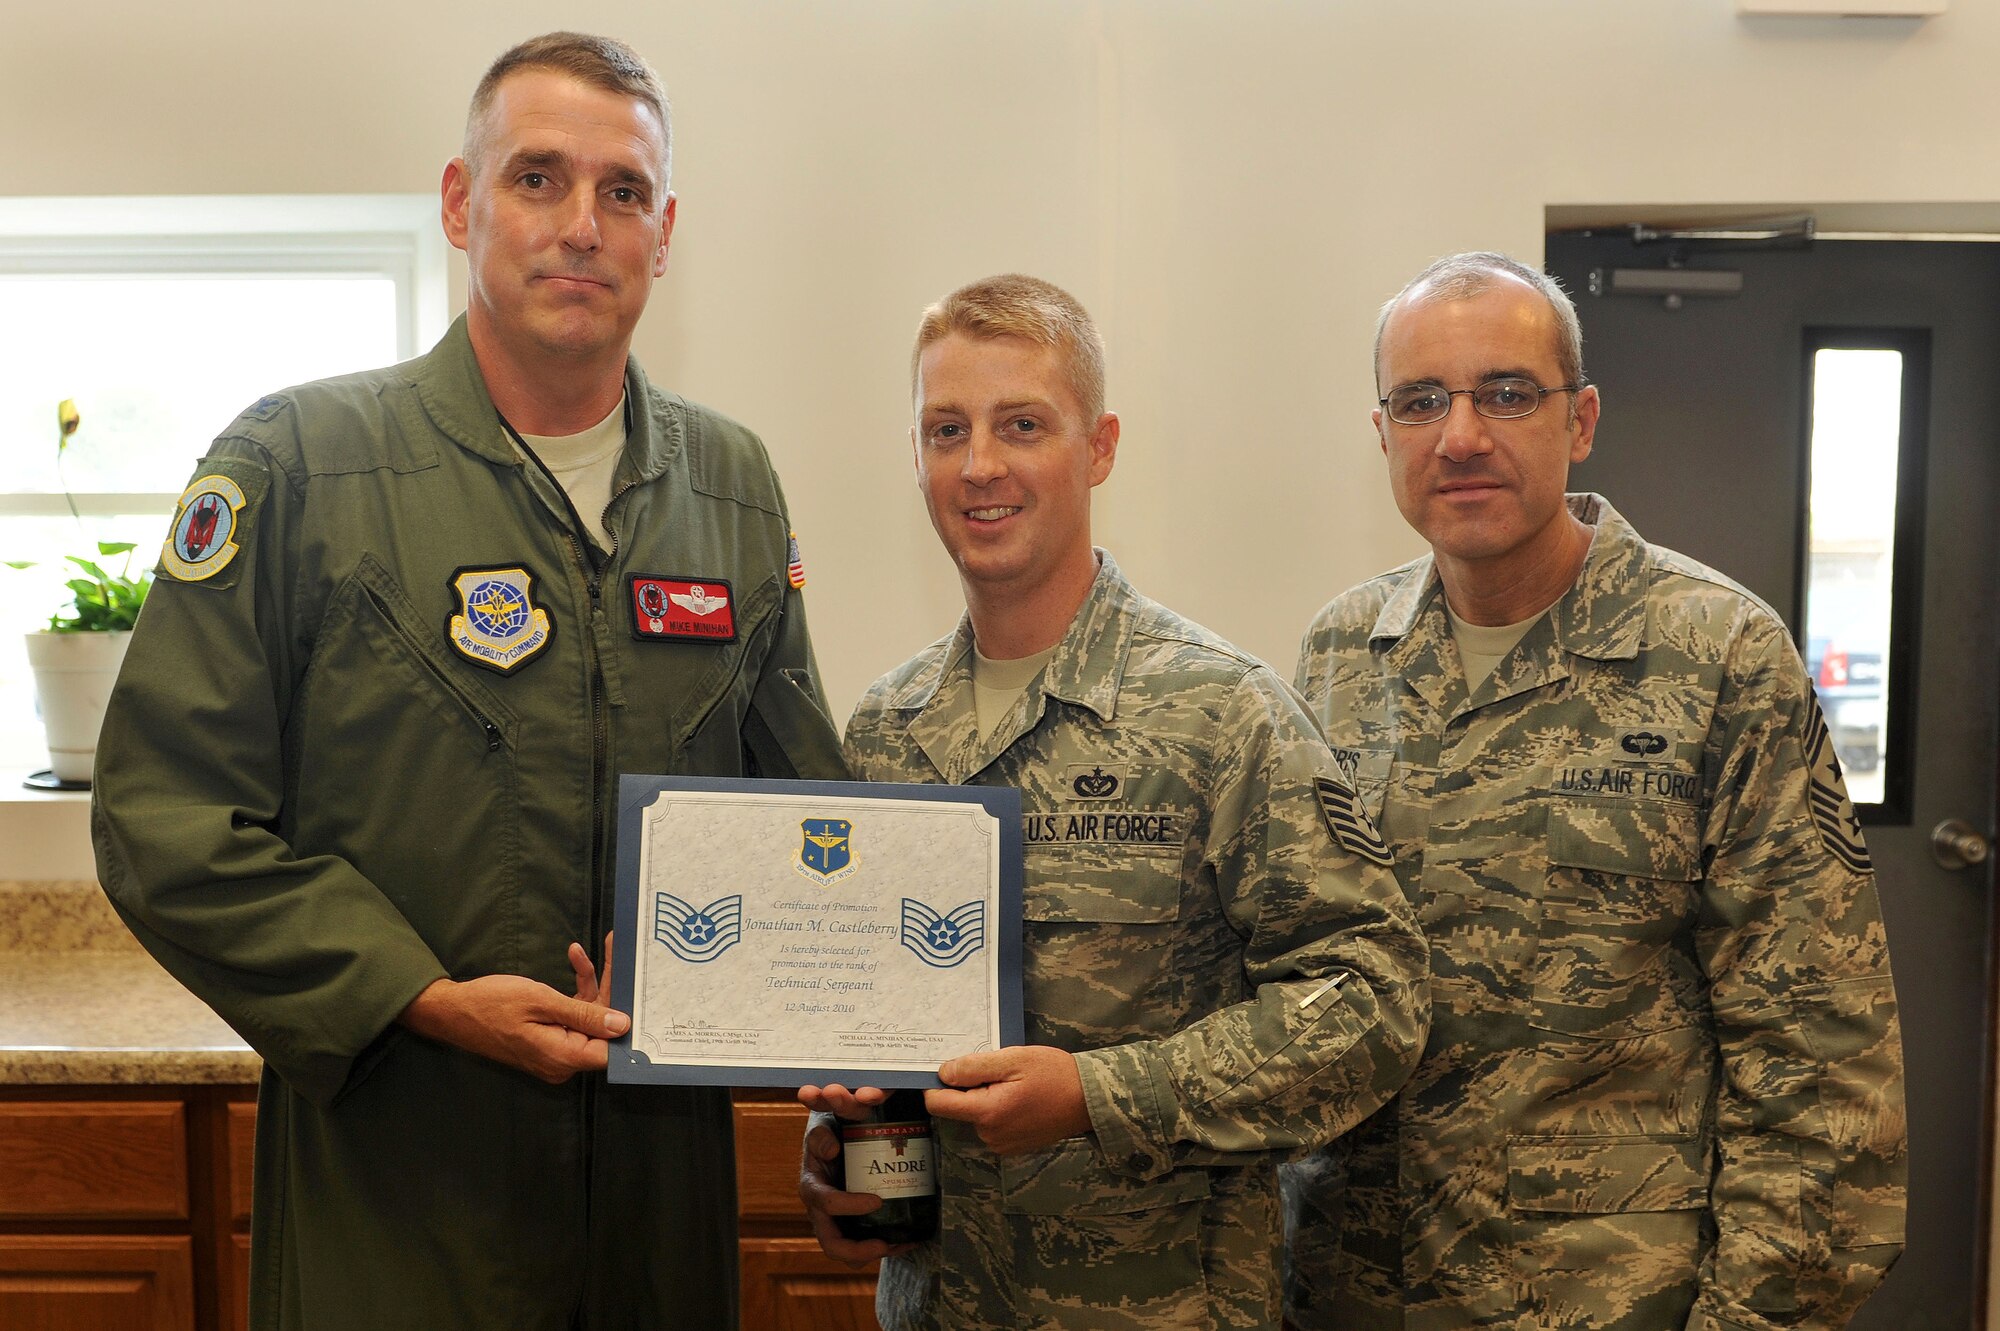 Col. Mike Minihan, 19th Airlift Wing commander; and Chief Master Sgt. James Morris, 19th Airlift Wing command chief; present a certificate of promotion Aug. 12 to Tech. Sgt. Jonathan Castleberry, 19th Civil Engineer Squadron structural craftsman. Sergeant Castleberry was surprised on his lunch break with an extra stripe “tacked” on by wing leaders as well as his civil engineer peers for being Stripes for Exceptional Performers promoted. He recently returned from a deployment to Iraq where he was lauded for his joint training leadership and efforts in reconstruction of an existing flightline. (U.S. Air Force photo by Senior Airman Steele C. G. Britton)